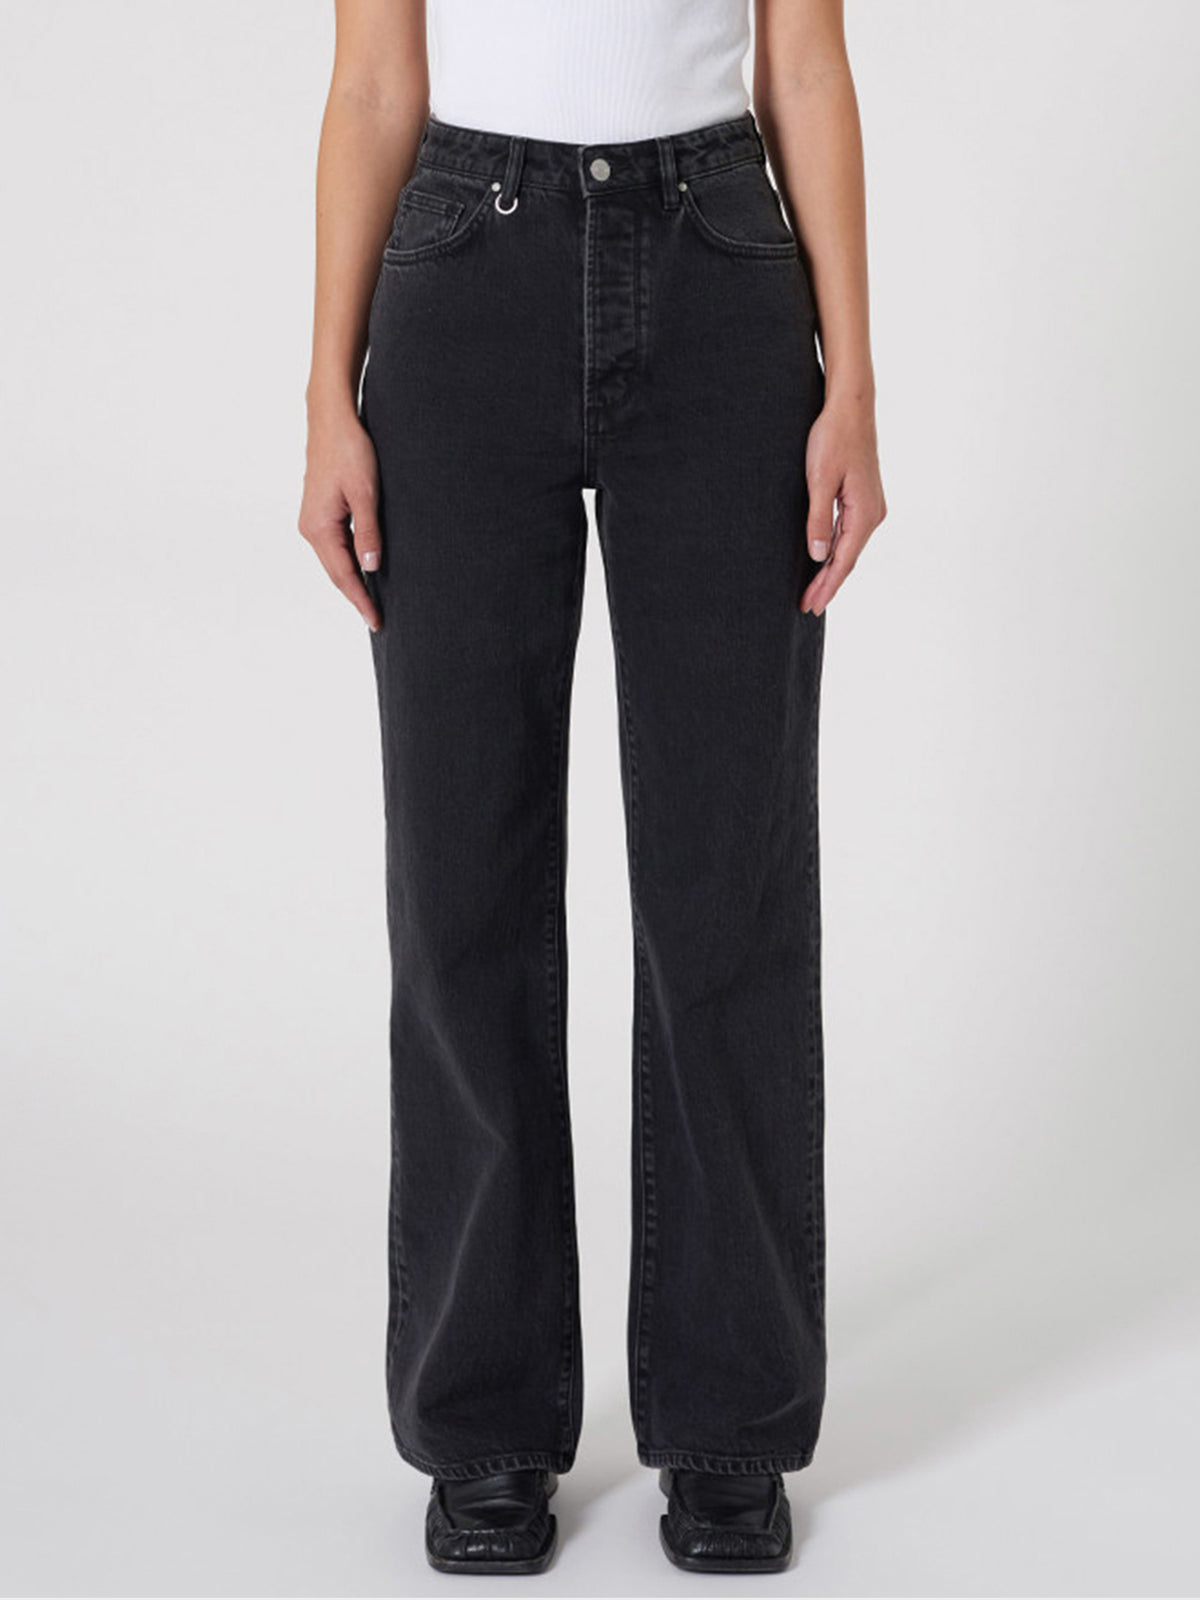 Coco Relaxed Jeans in French Black